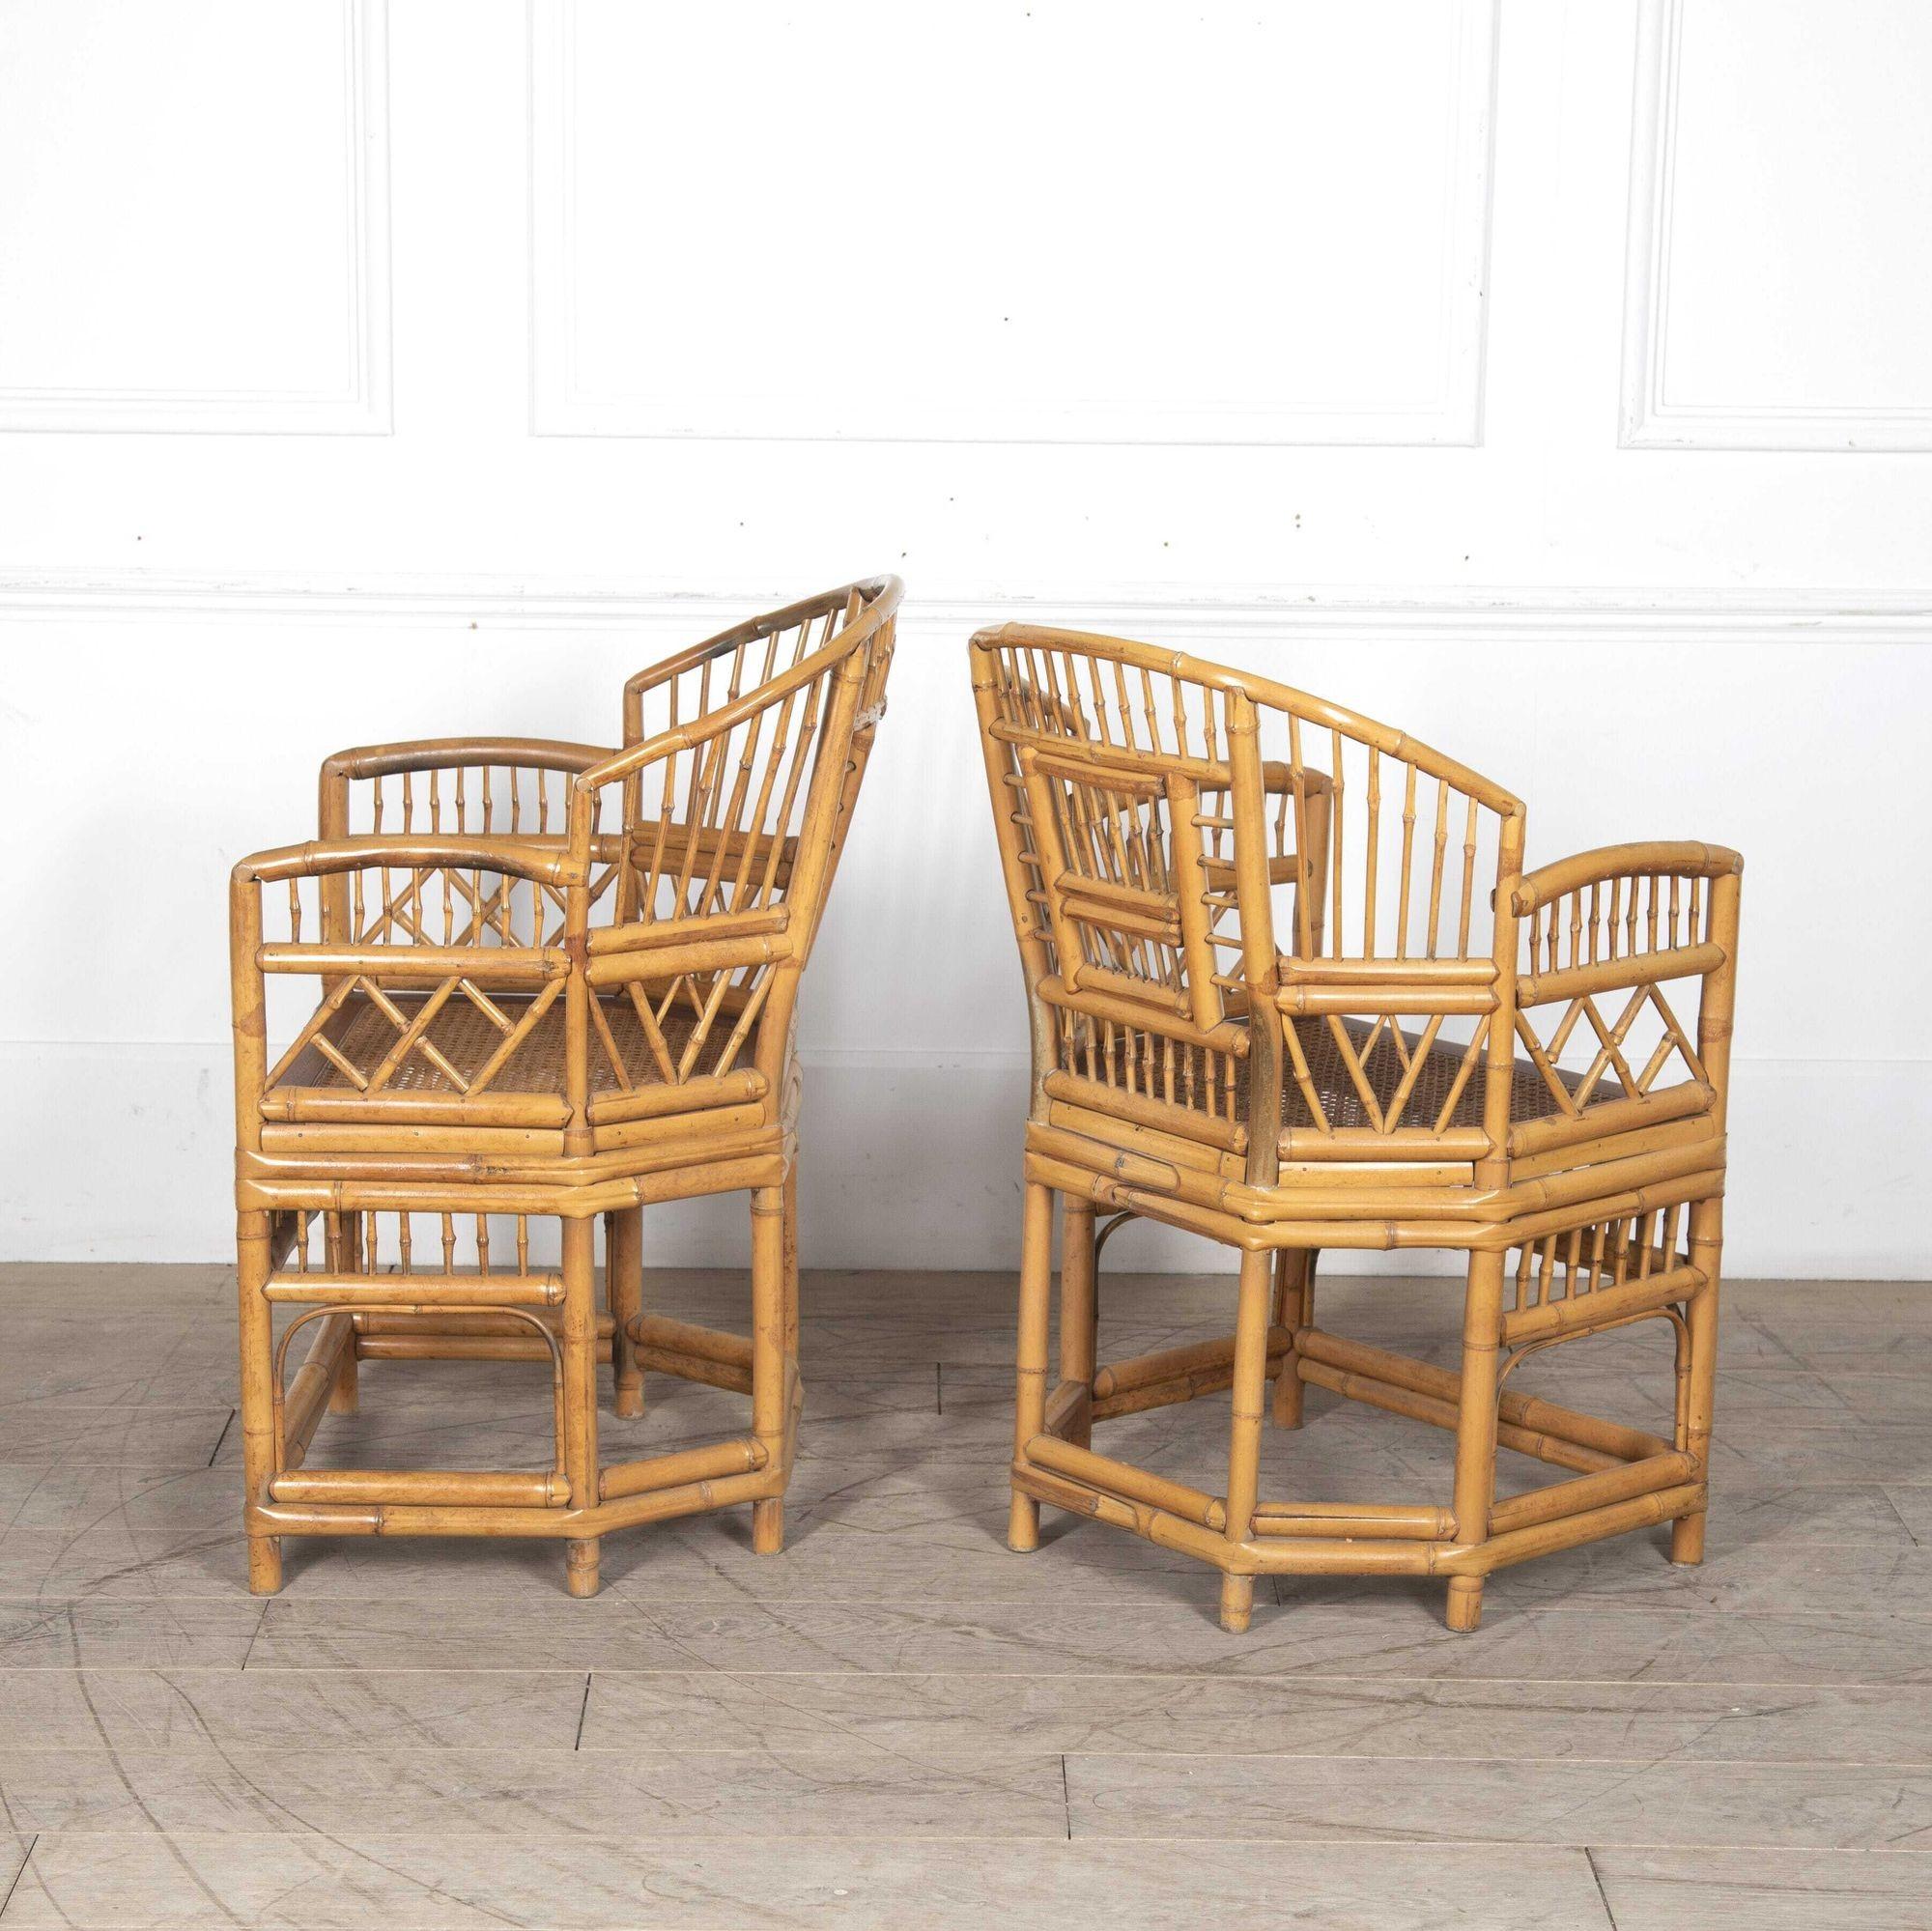 Set of six 20th Century bamboo Brighton pavilion chairs.
Dating from the Mid 20th Century, this set of six bamboo chairs is in very good condition and shall be a stylish design choice for many years to come. 
All six chairs are very comfortable